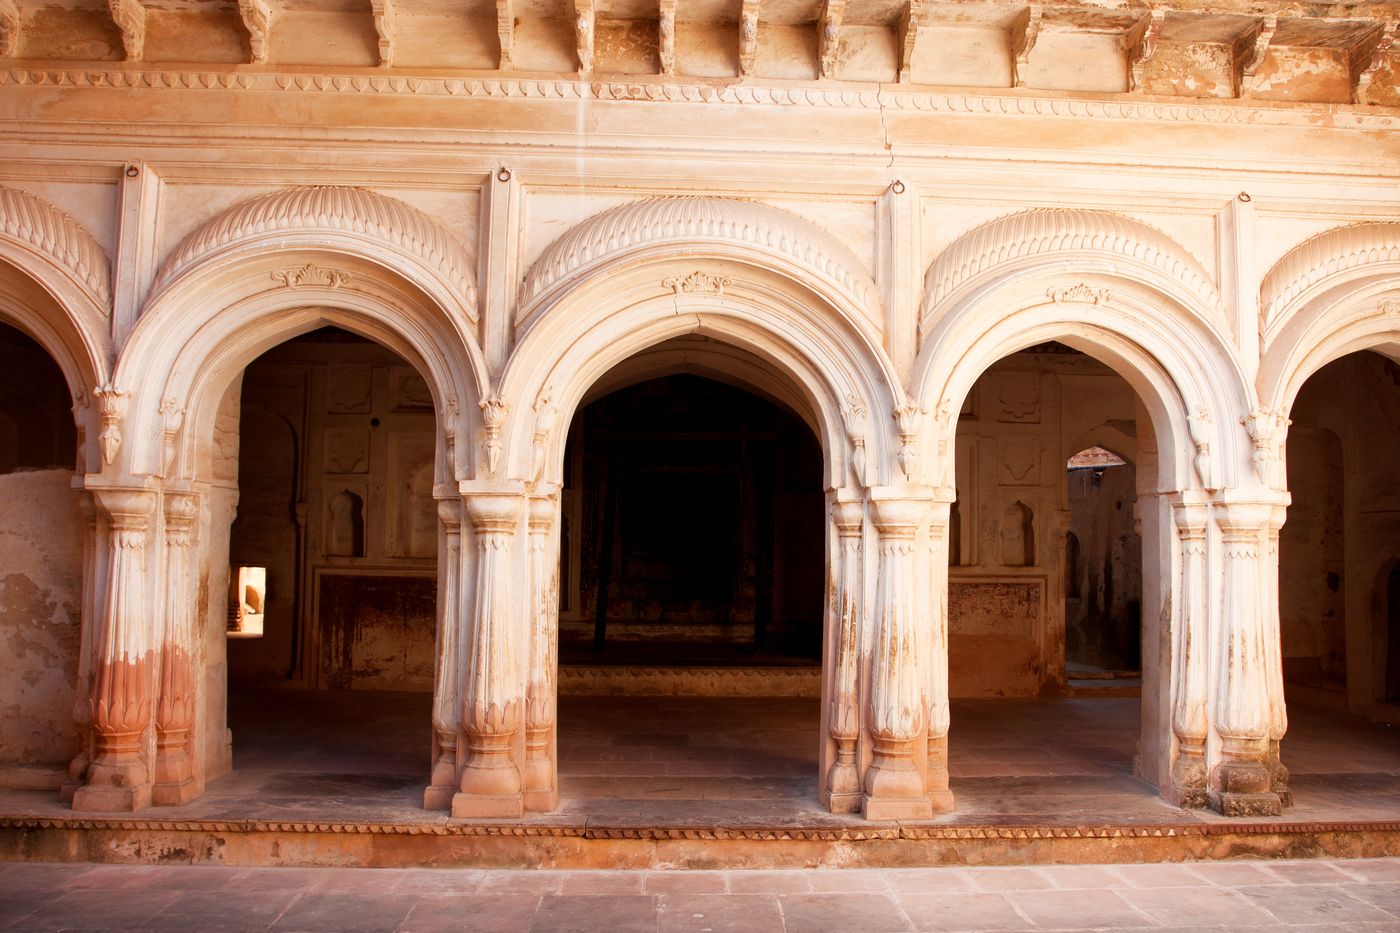 The high arches inside Lakshmi Narayan temple in Orchha, constructed in 1622 by Bundela king Veer Singh 